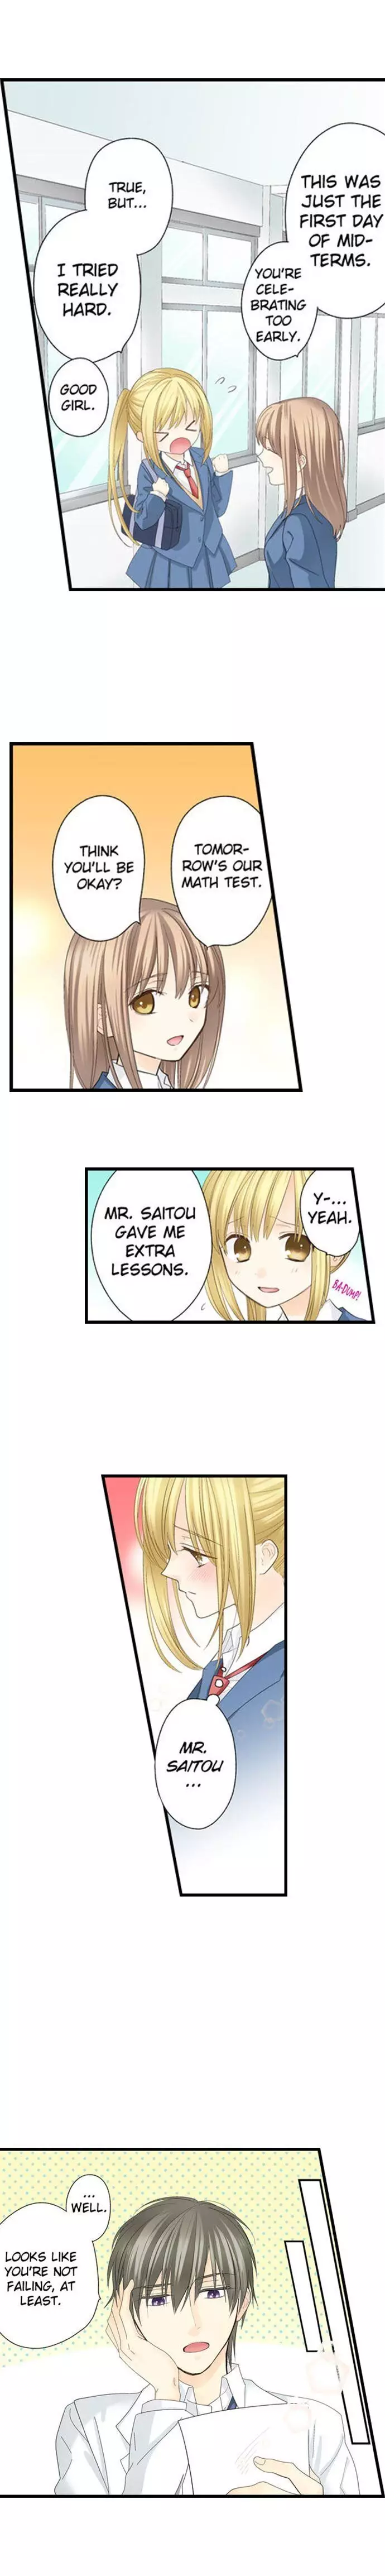 Running A Love Hotel With My Math Teacher - 6 page 3